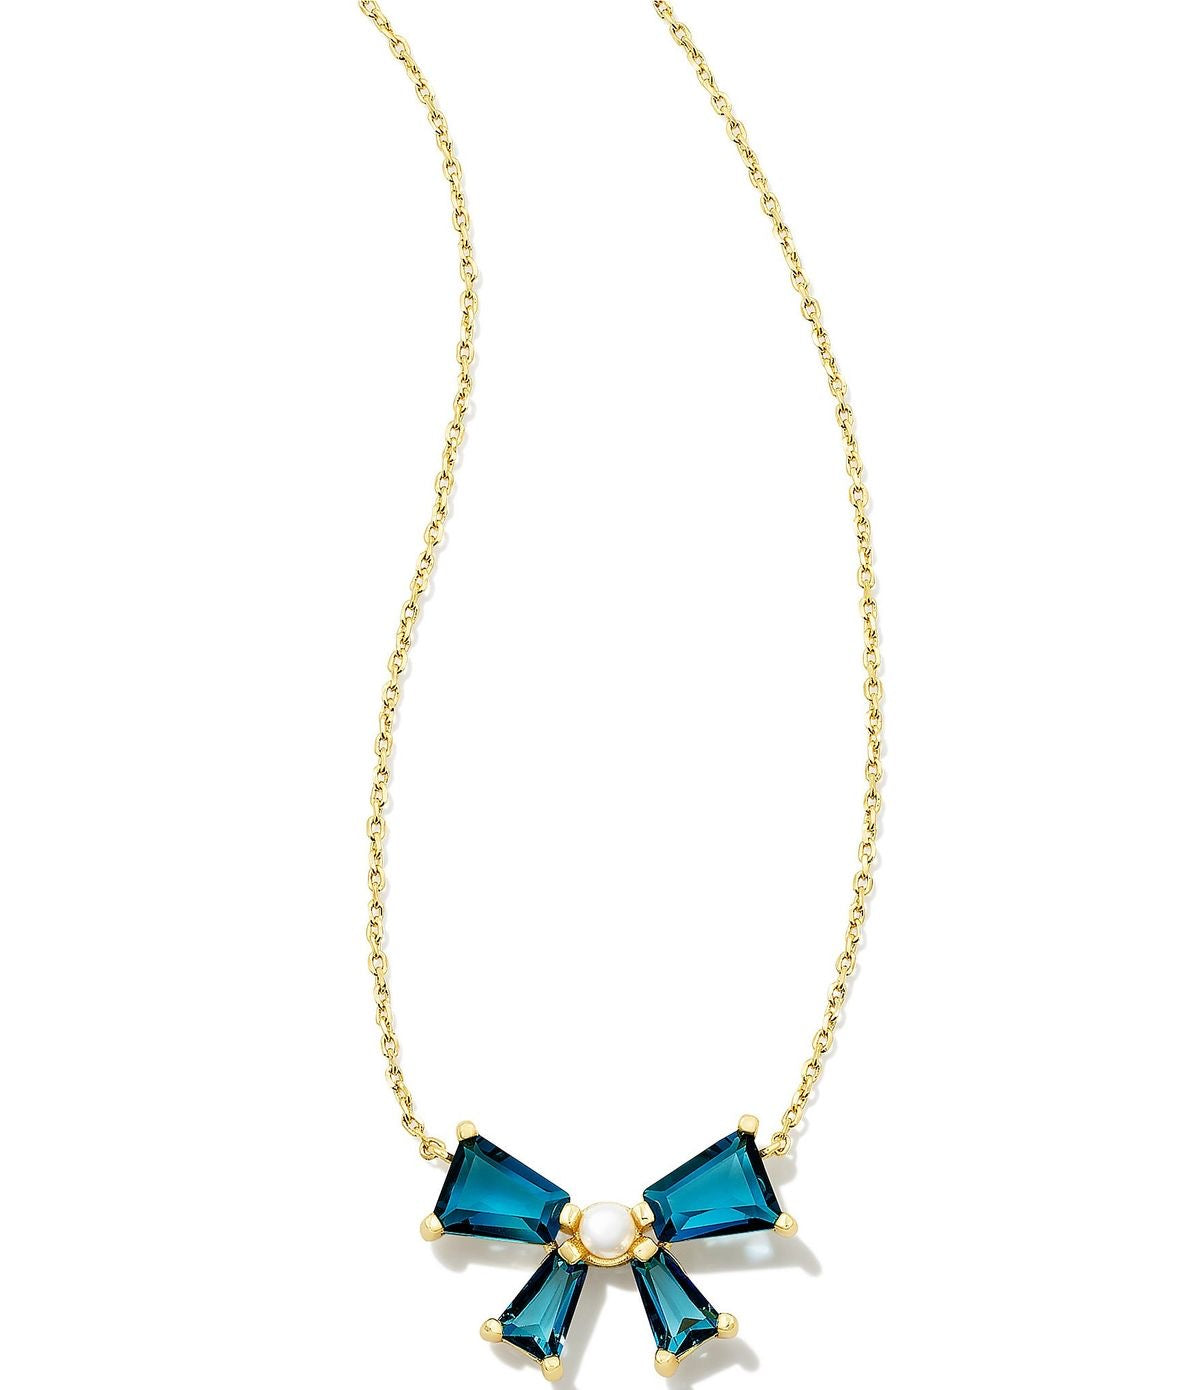 Blair Teal Bow Pendant Gold Necklace